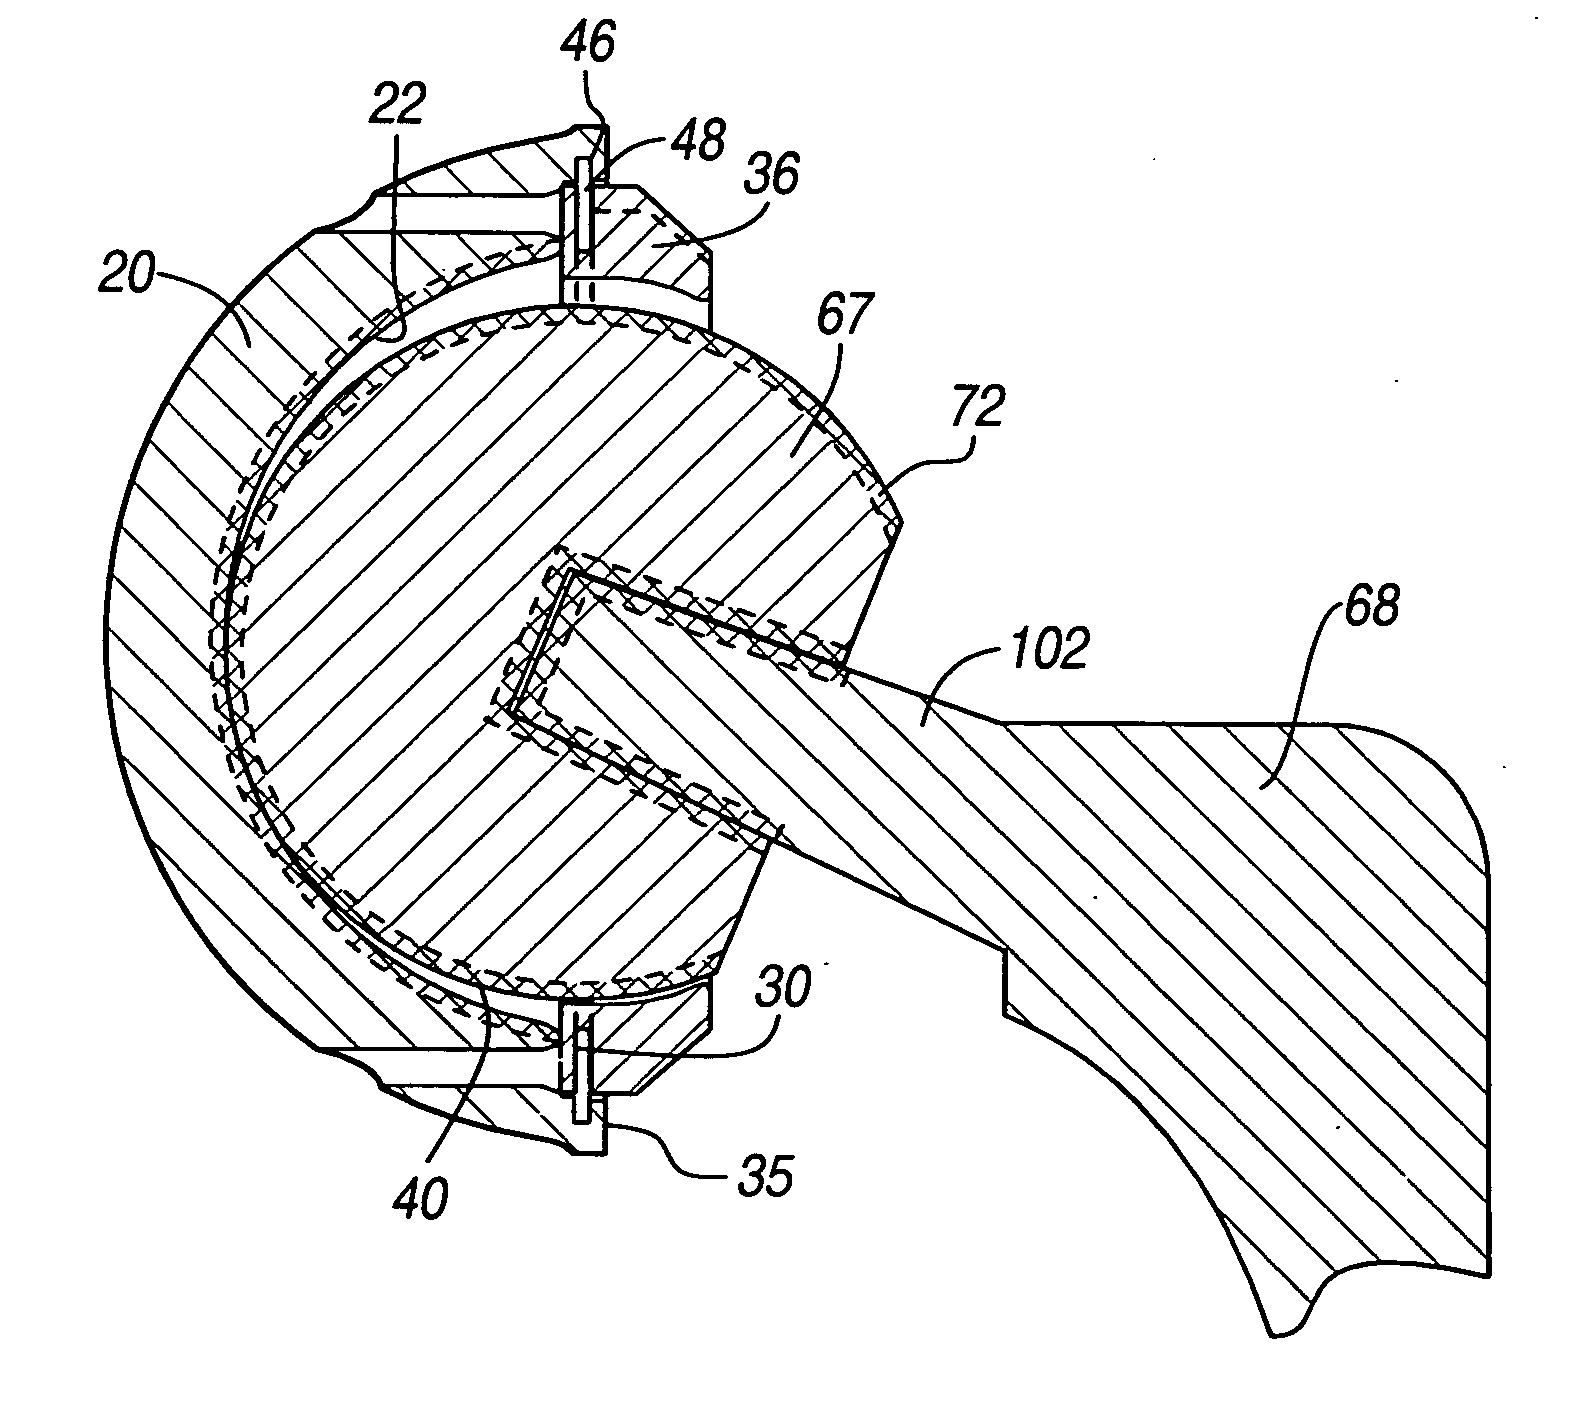 Method and apparatus for surface hardening implants